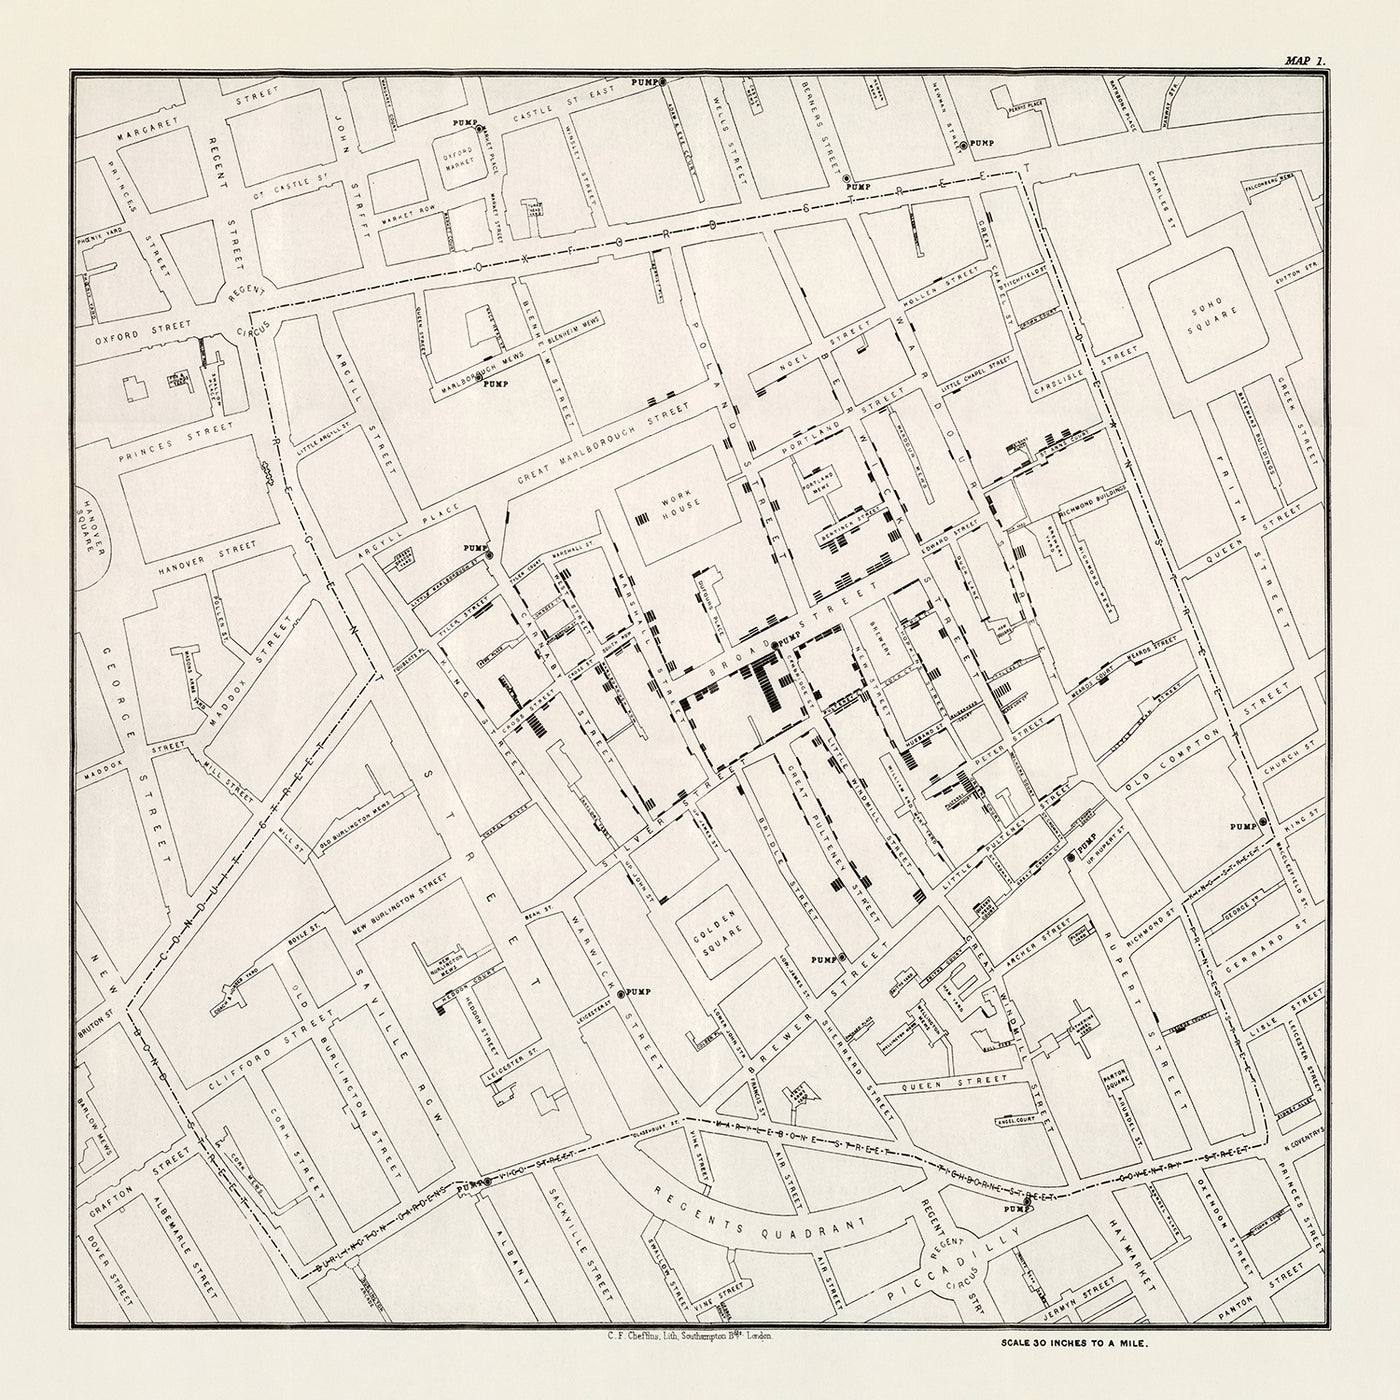 Old Map of the Cholera Outbreak in London by John Snow, 1855: Water Pumps, Deaths, Streets